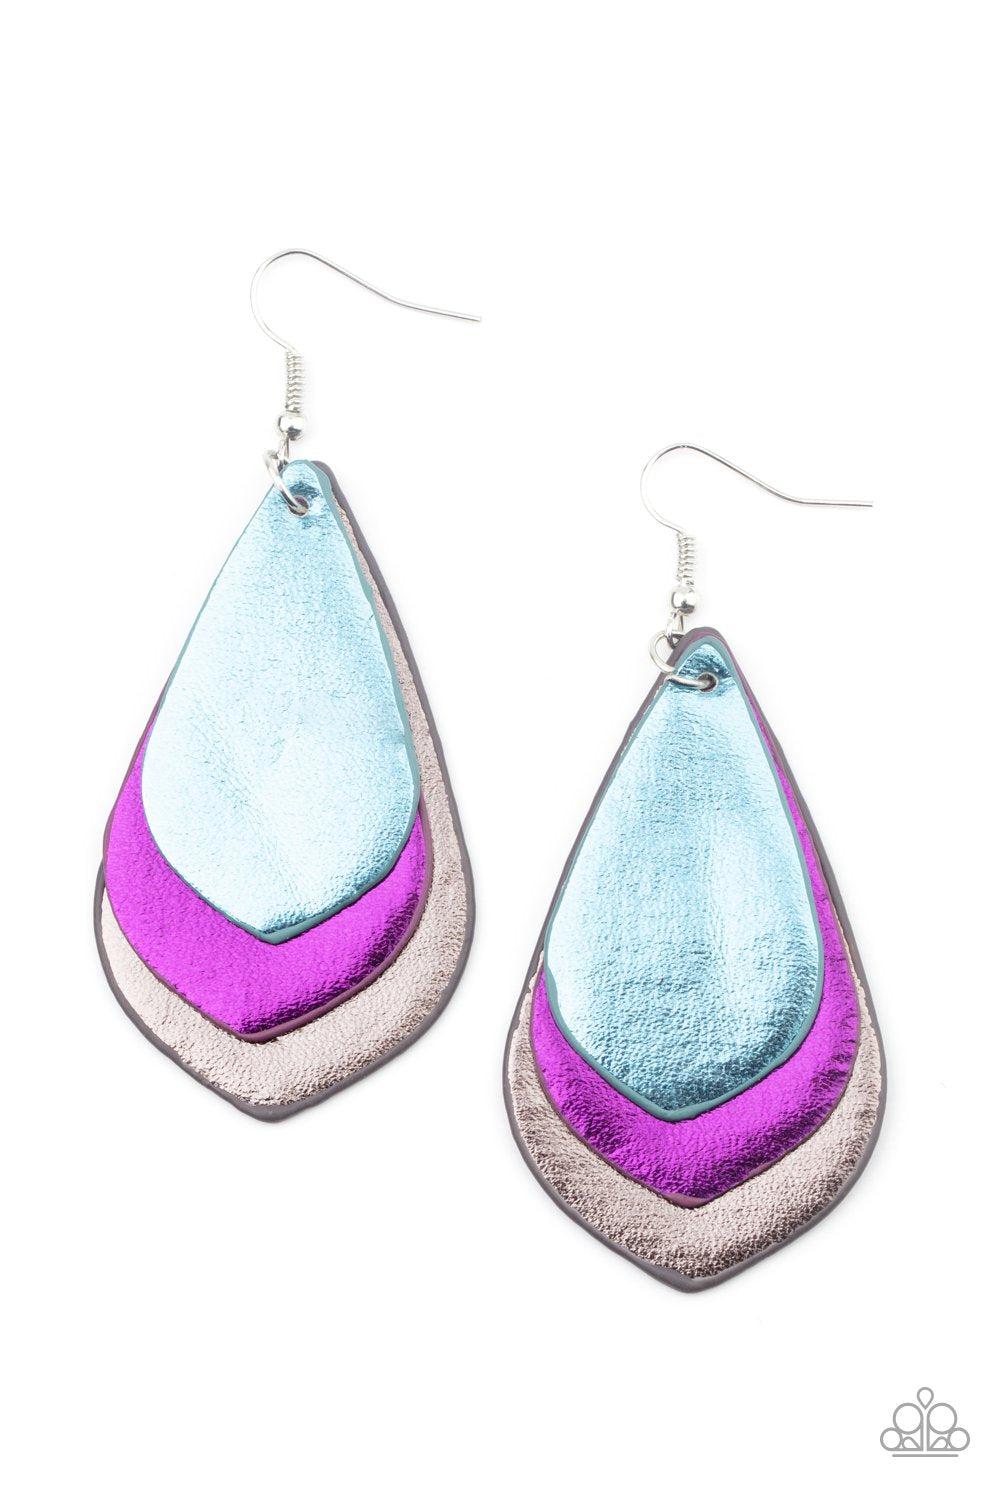 GLISTEN Up! Multi Blue and Purple Leather Earrings - Paparazzi Accessories- lightbox - CarasShop.com - $5 Jewelry by Cara Jewels